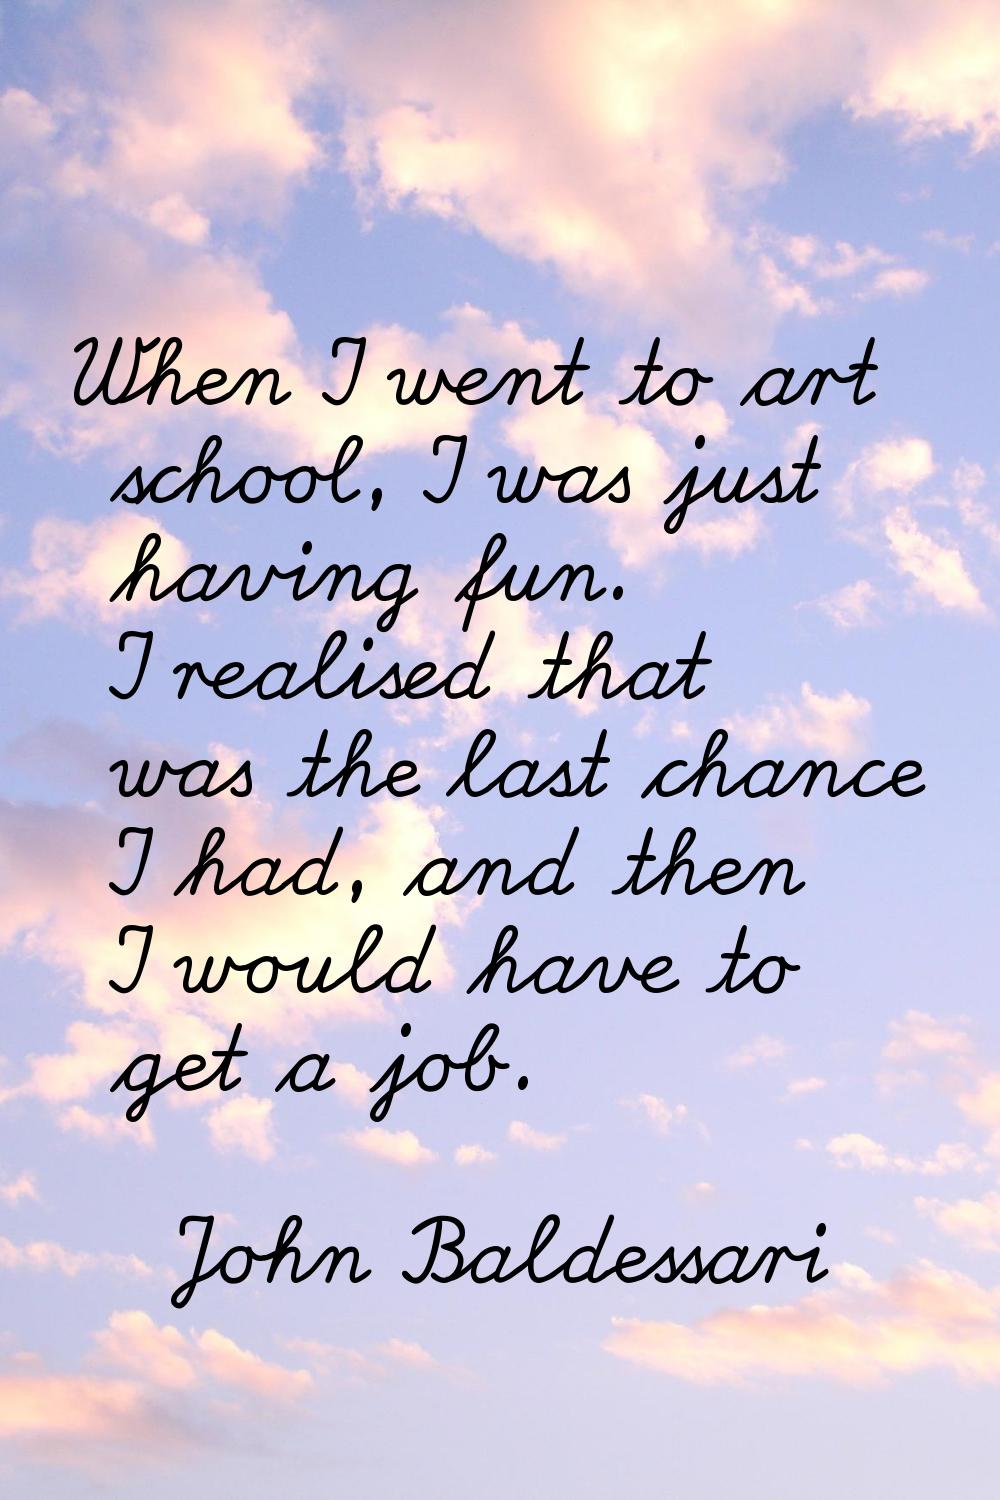 When I went to art school, I was just having fun. I realised that was the last chance I had, and th